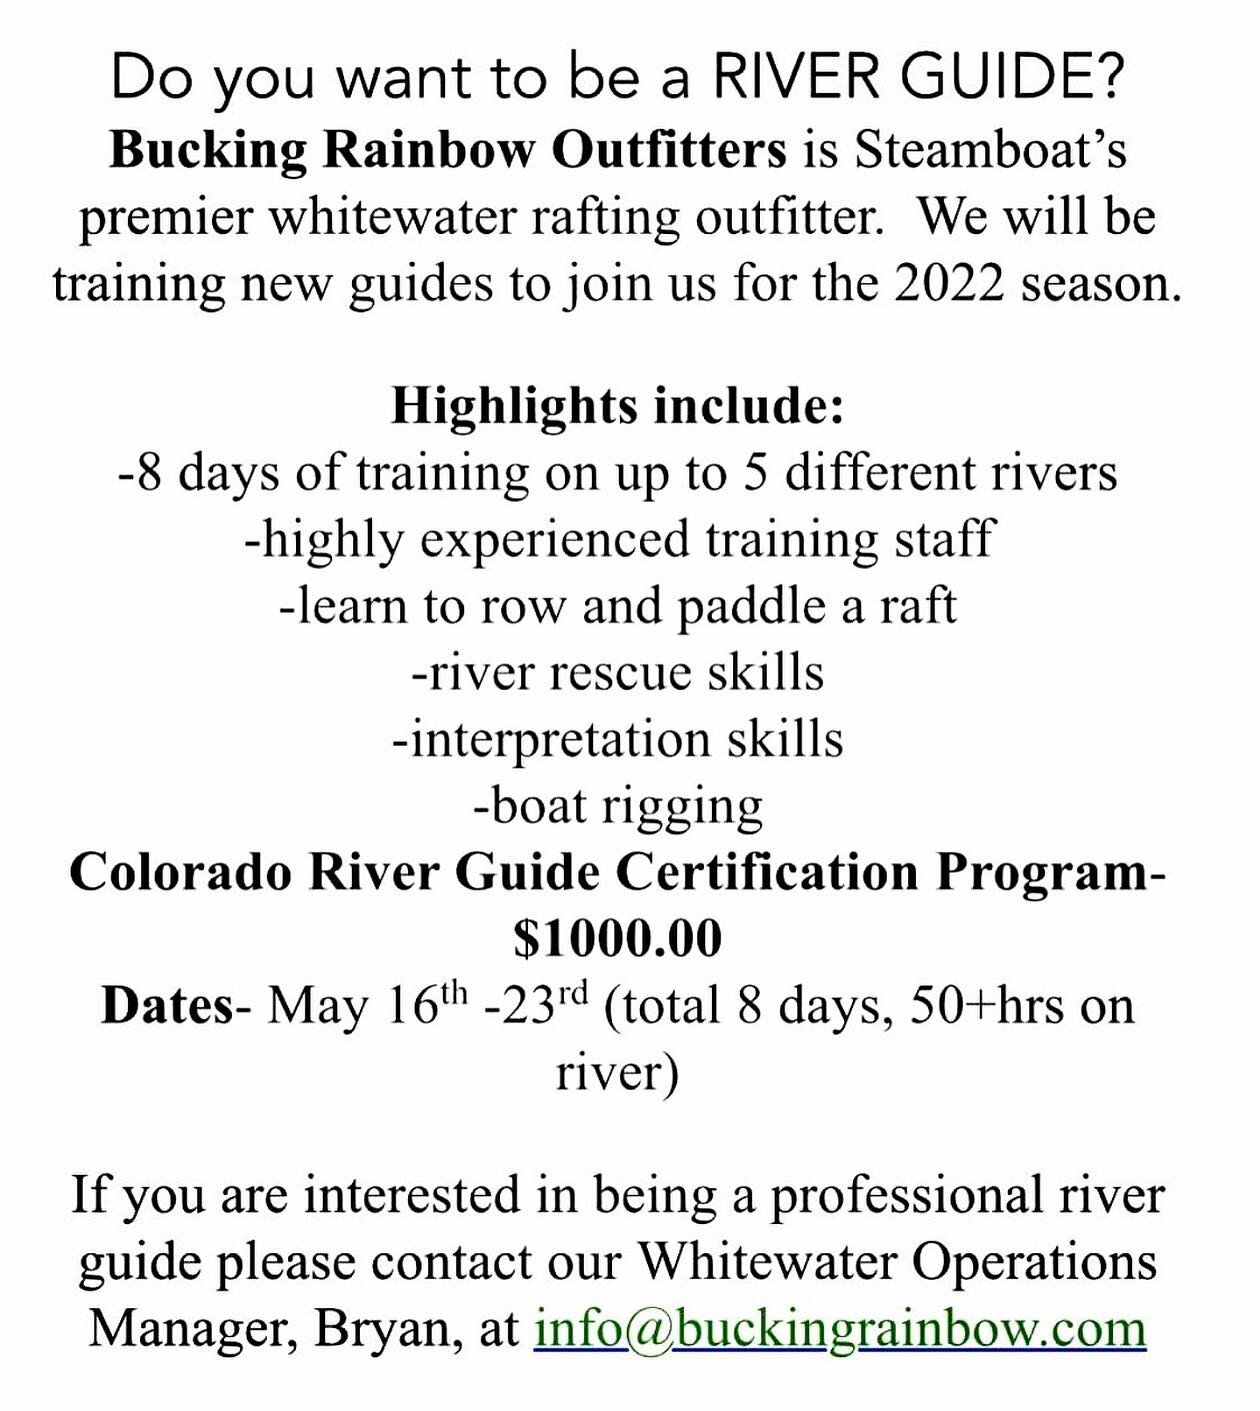 Do you want to be a river guide? Send us a message!  #steamboat #colorado #whitewater #rafting